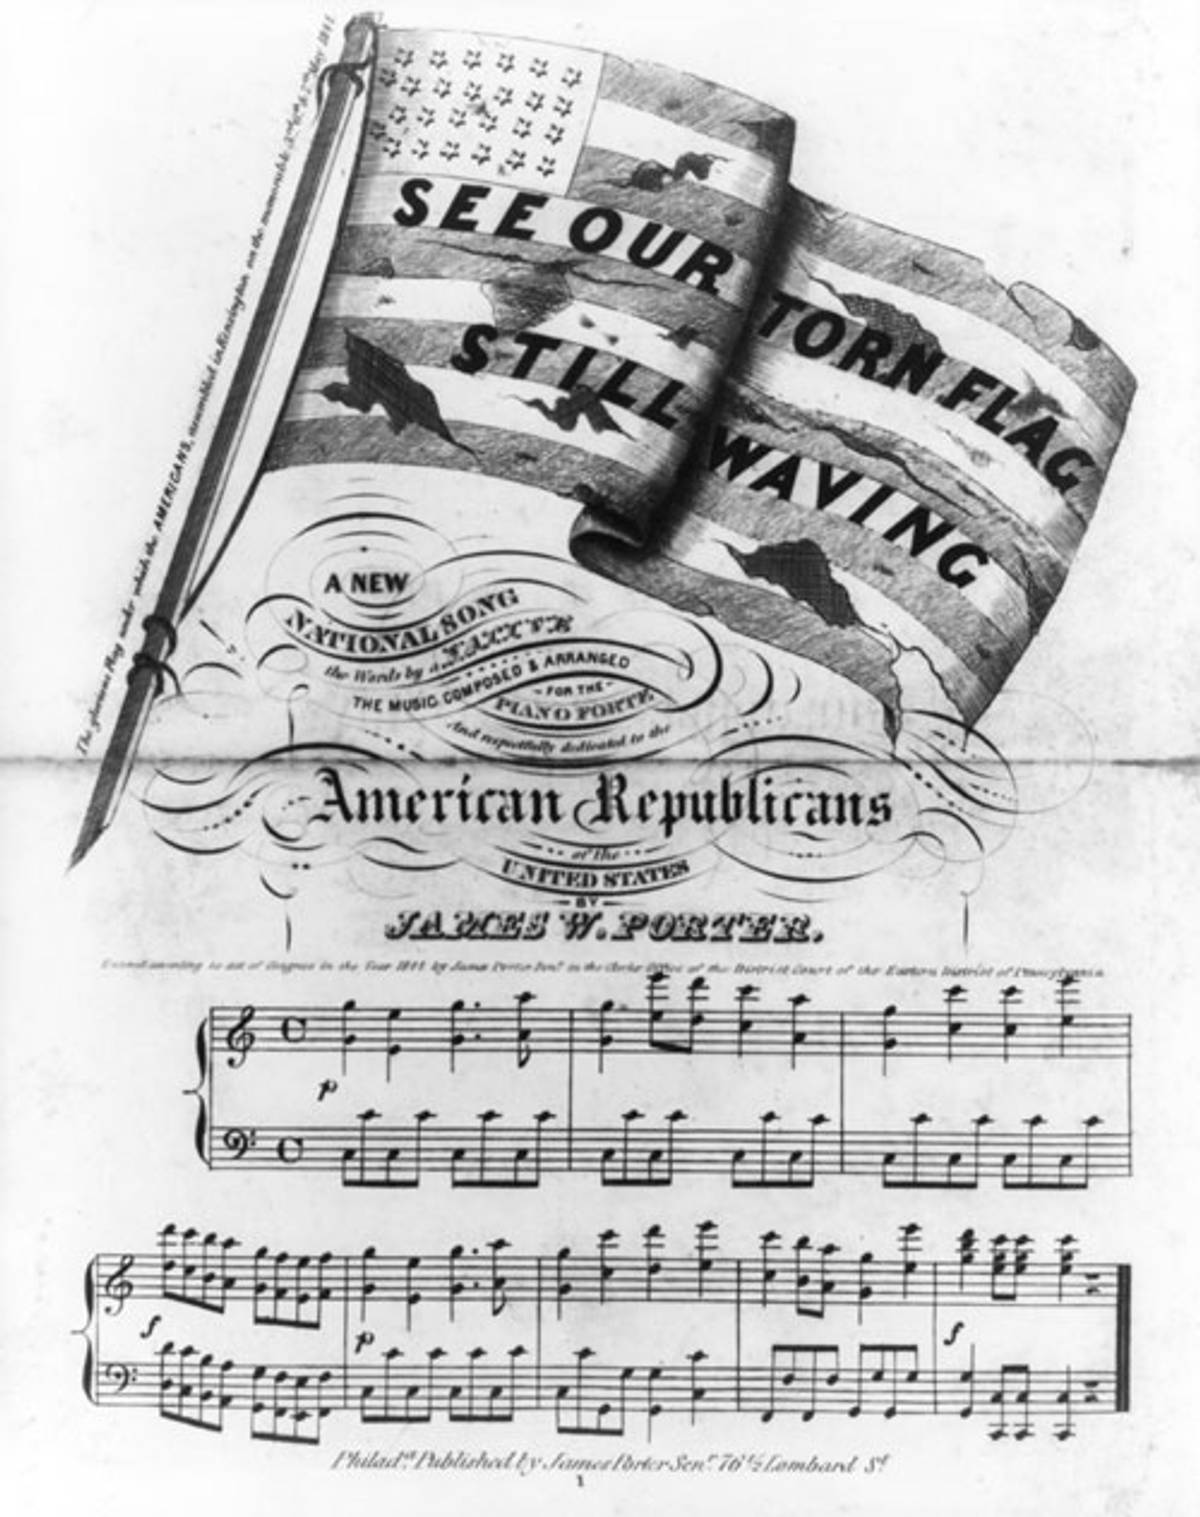 An illustrated sheet-music cover glorifying the nativist cause, produced shortly after the bloody anti-Catholic riots in Kensington, Philadelphia, of May 1844. (Image: Library of Congress)